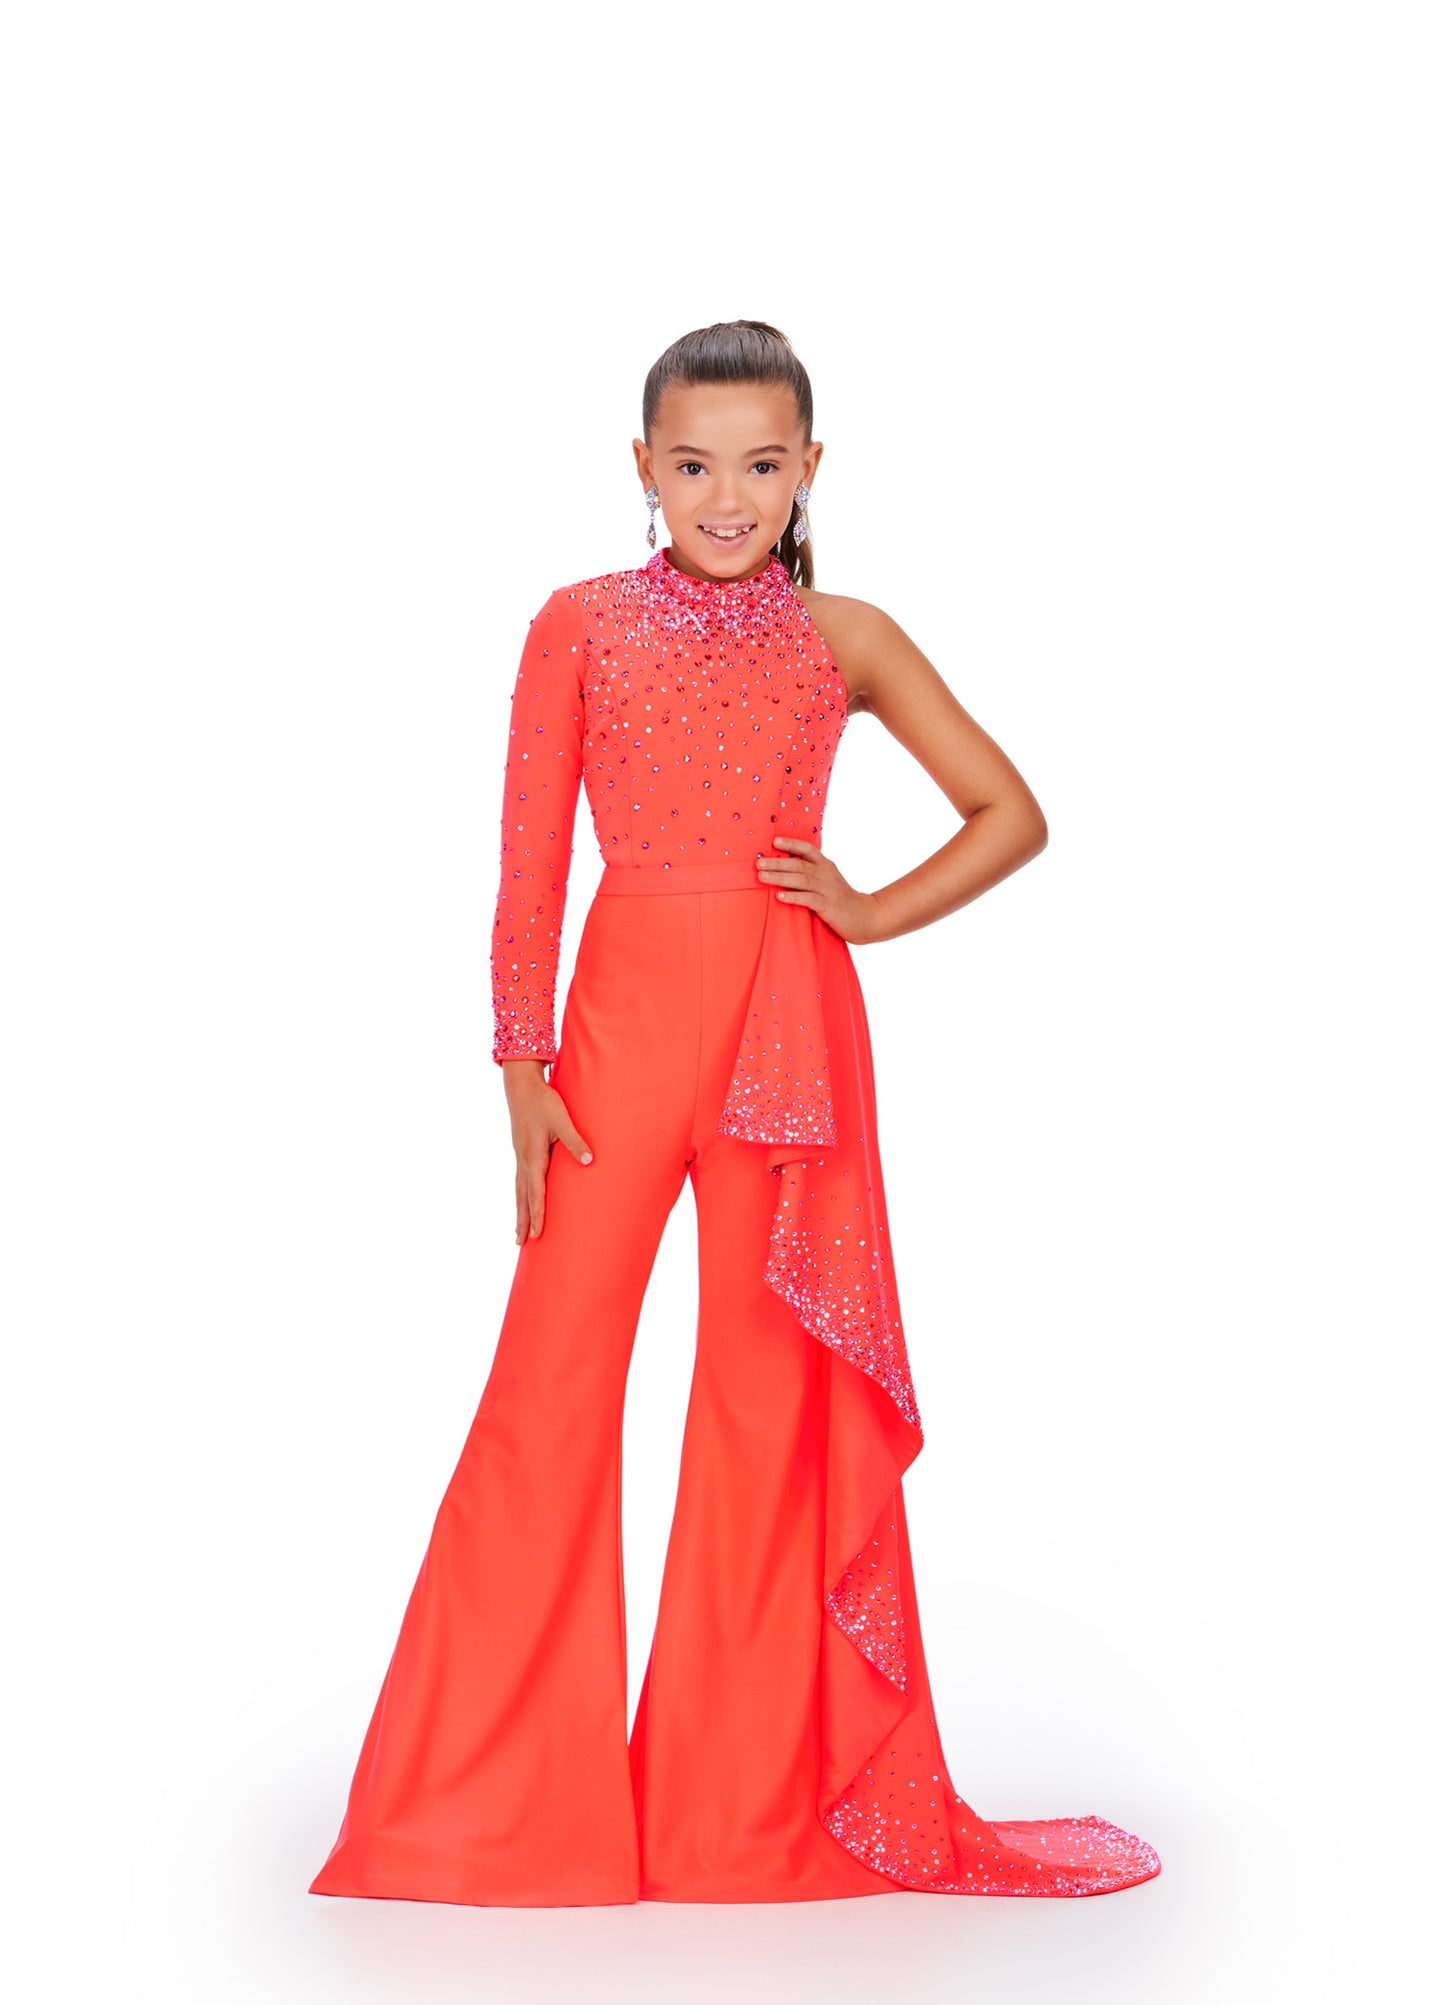 Presenting the Ashley Lauren Kids 8253 Girls Pageant Jumpsuit, featuring a stunning ruffle train and bell bottom pants. This elegant pant suit offers long sleeves for comfort and style, perfect for your little star's big moment. Elevate her confidence and charm on stage with this chic and timeless design. Bring the sass in this high neckline jumpsuit with one sleeve